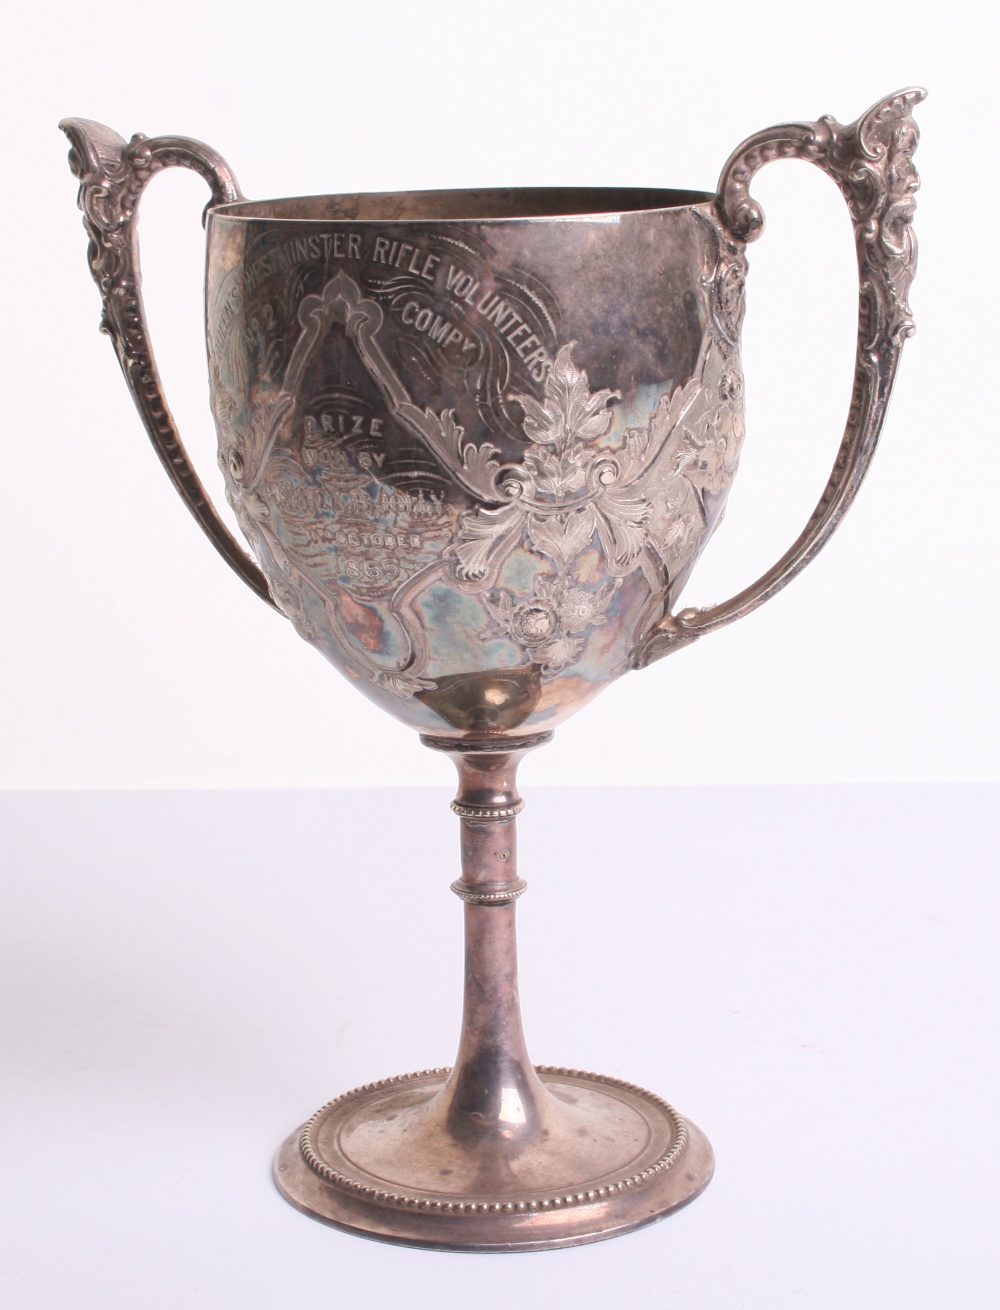 Queens Westminster Rifle Volunteers Trophy Cup of silver plate with fine quality raised floral